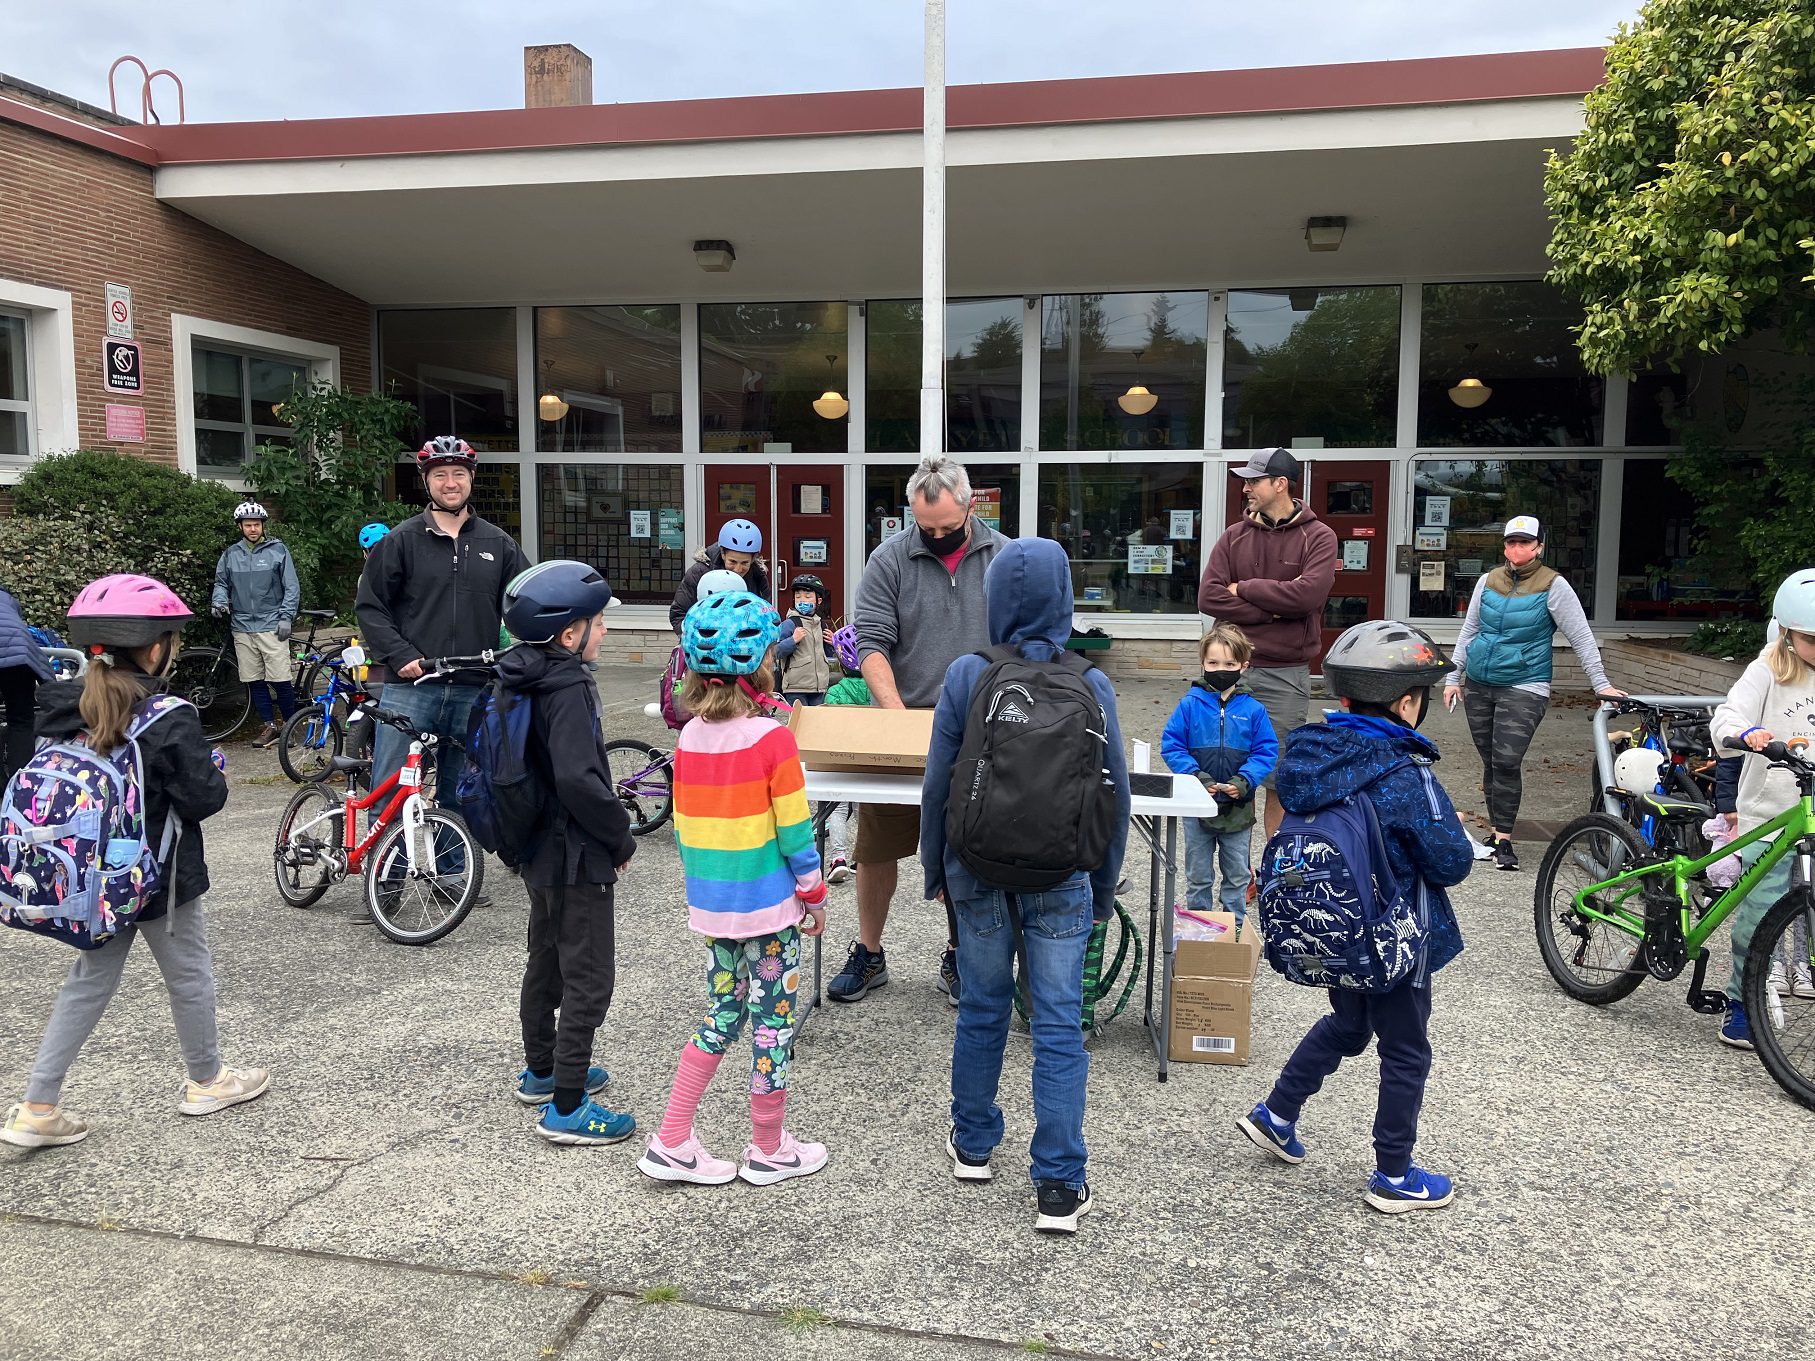 Lafayette Elementary School students line up for free giveaways after biking or scooting to school on May 20. Photo credit: Seattle Public Schools.